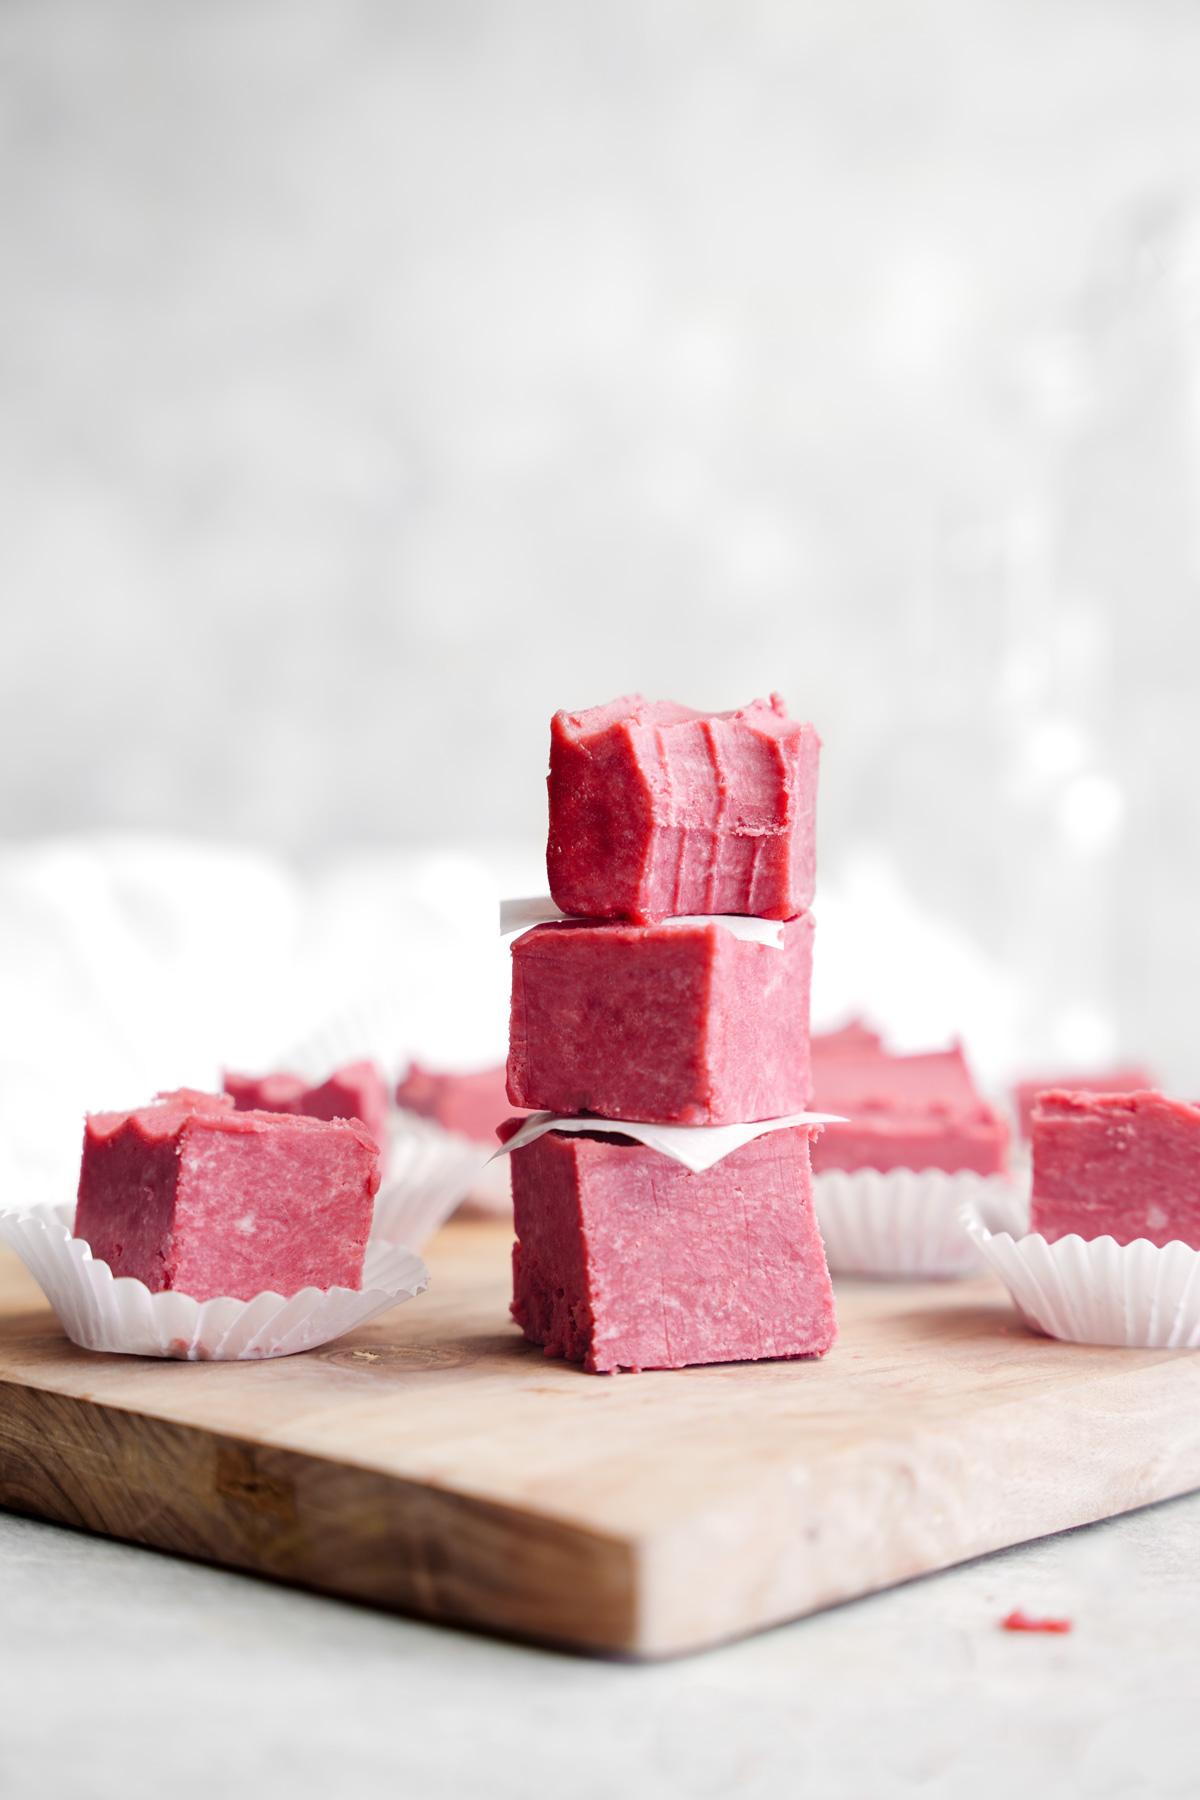 the vegan red velvet fudge stacked on top of each other